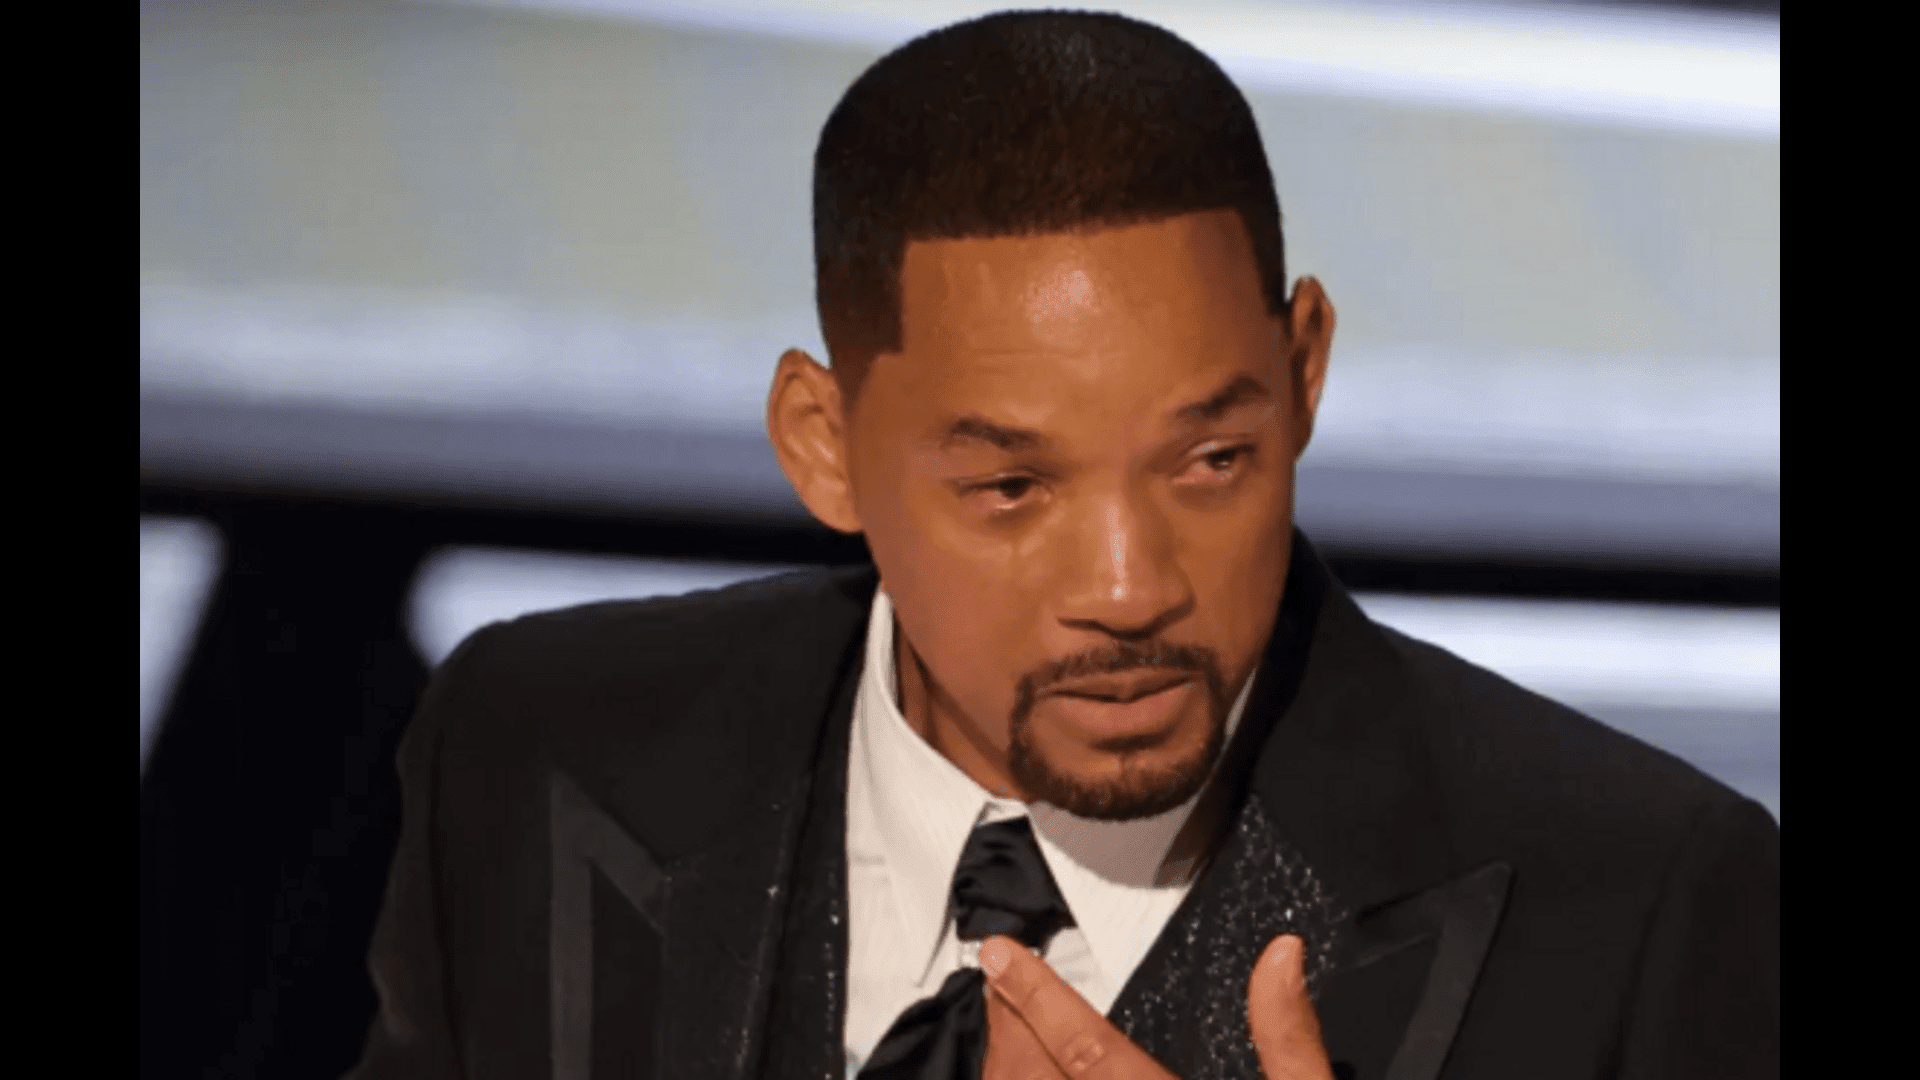 ”will-smith-responded-to-a-10-year-ban-from-the-academy-after-the-oscar-slap”